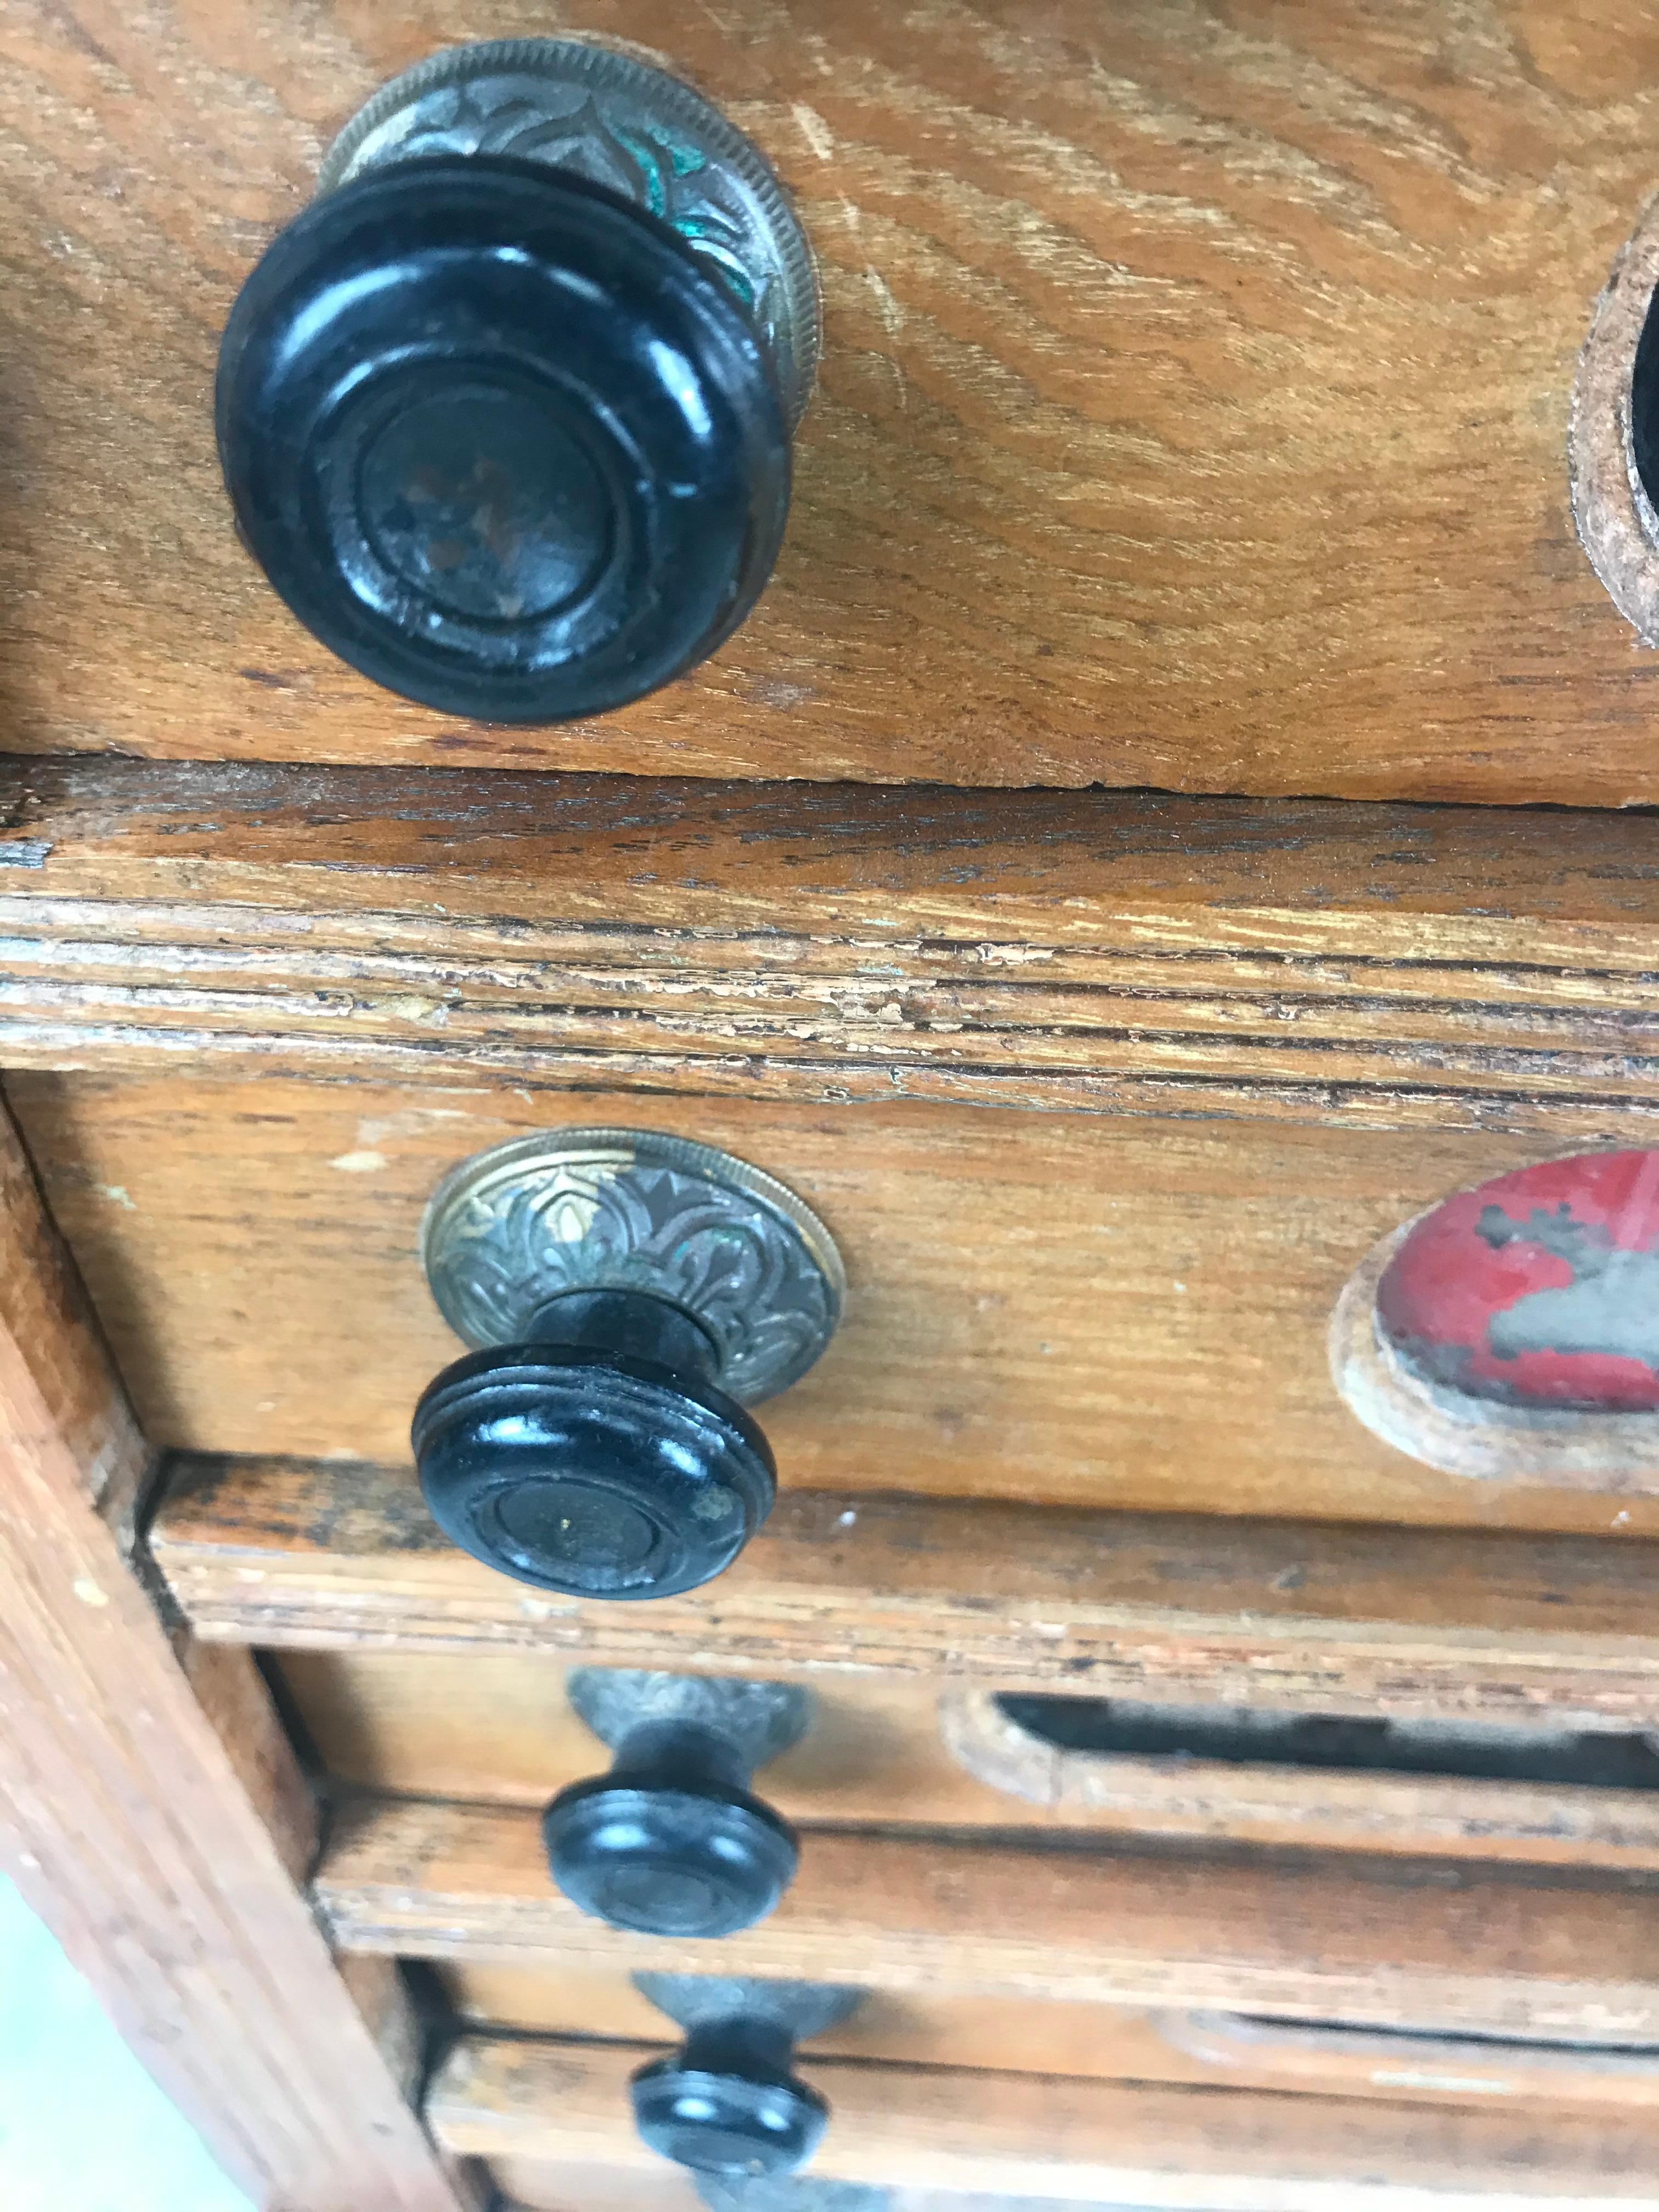 Antique spool cabinet. Made of oak with five drawers. Retains its original reverse painted drawers as well as its original hand pulls, this was used in an old general store to hold sewing notions. Would make an amazing jewelry chest or desk